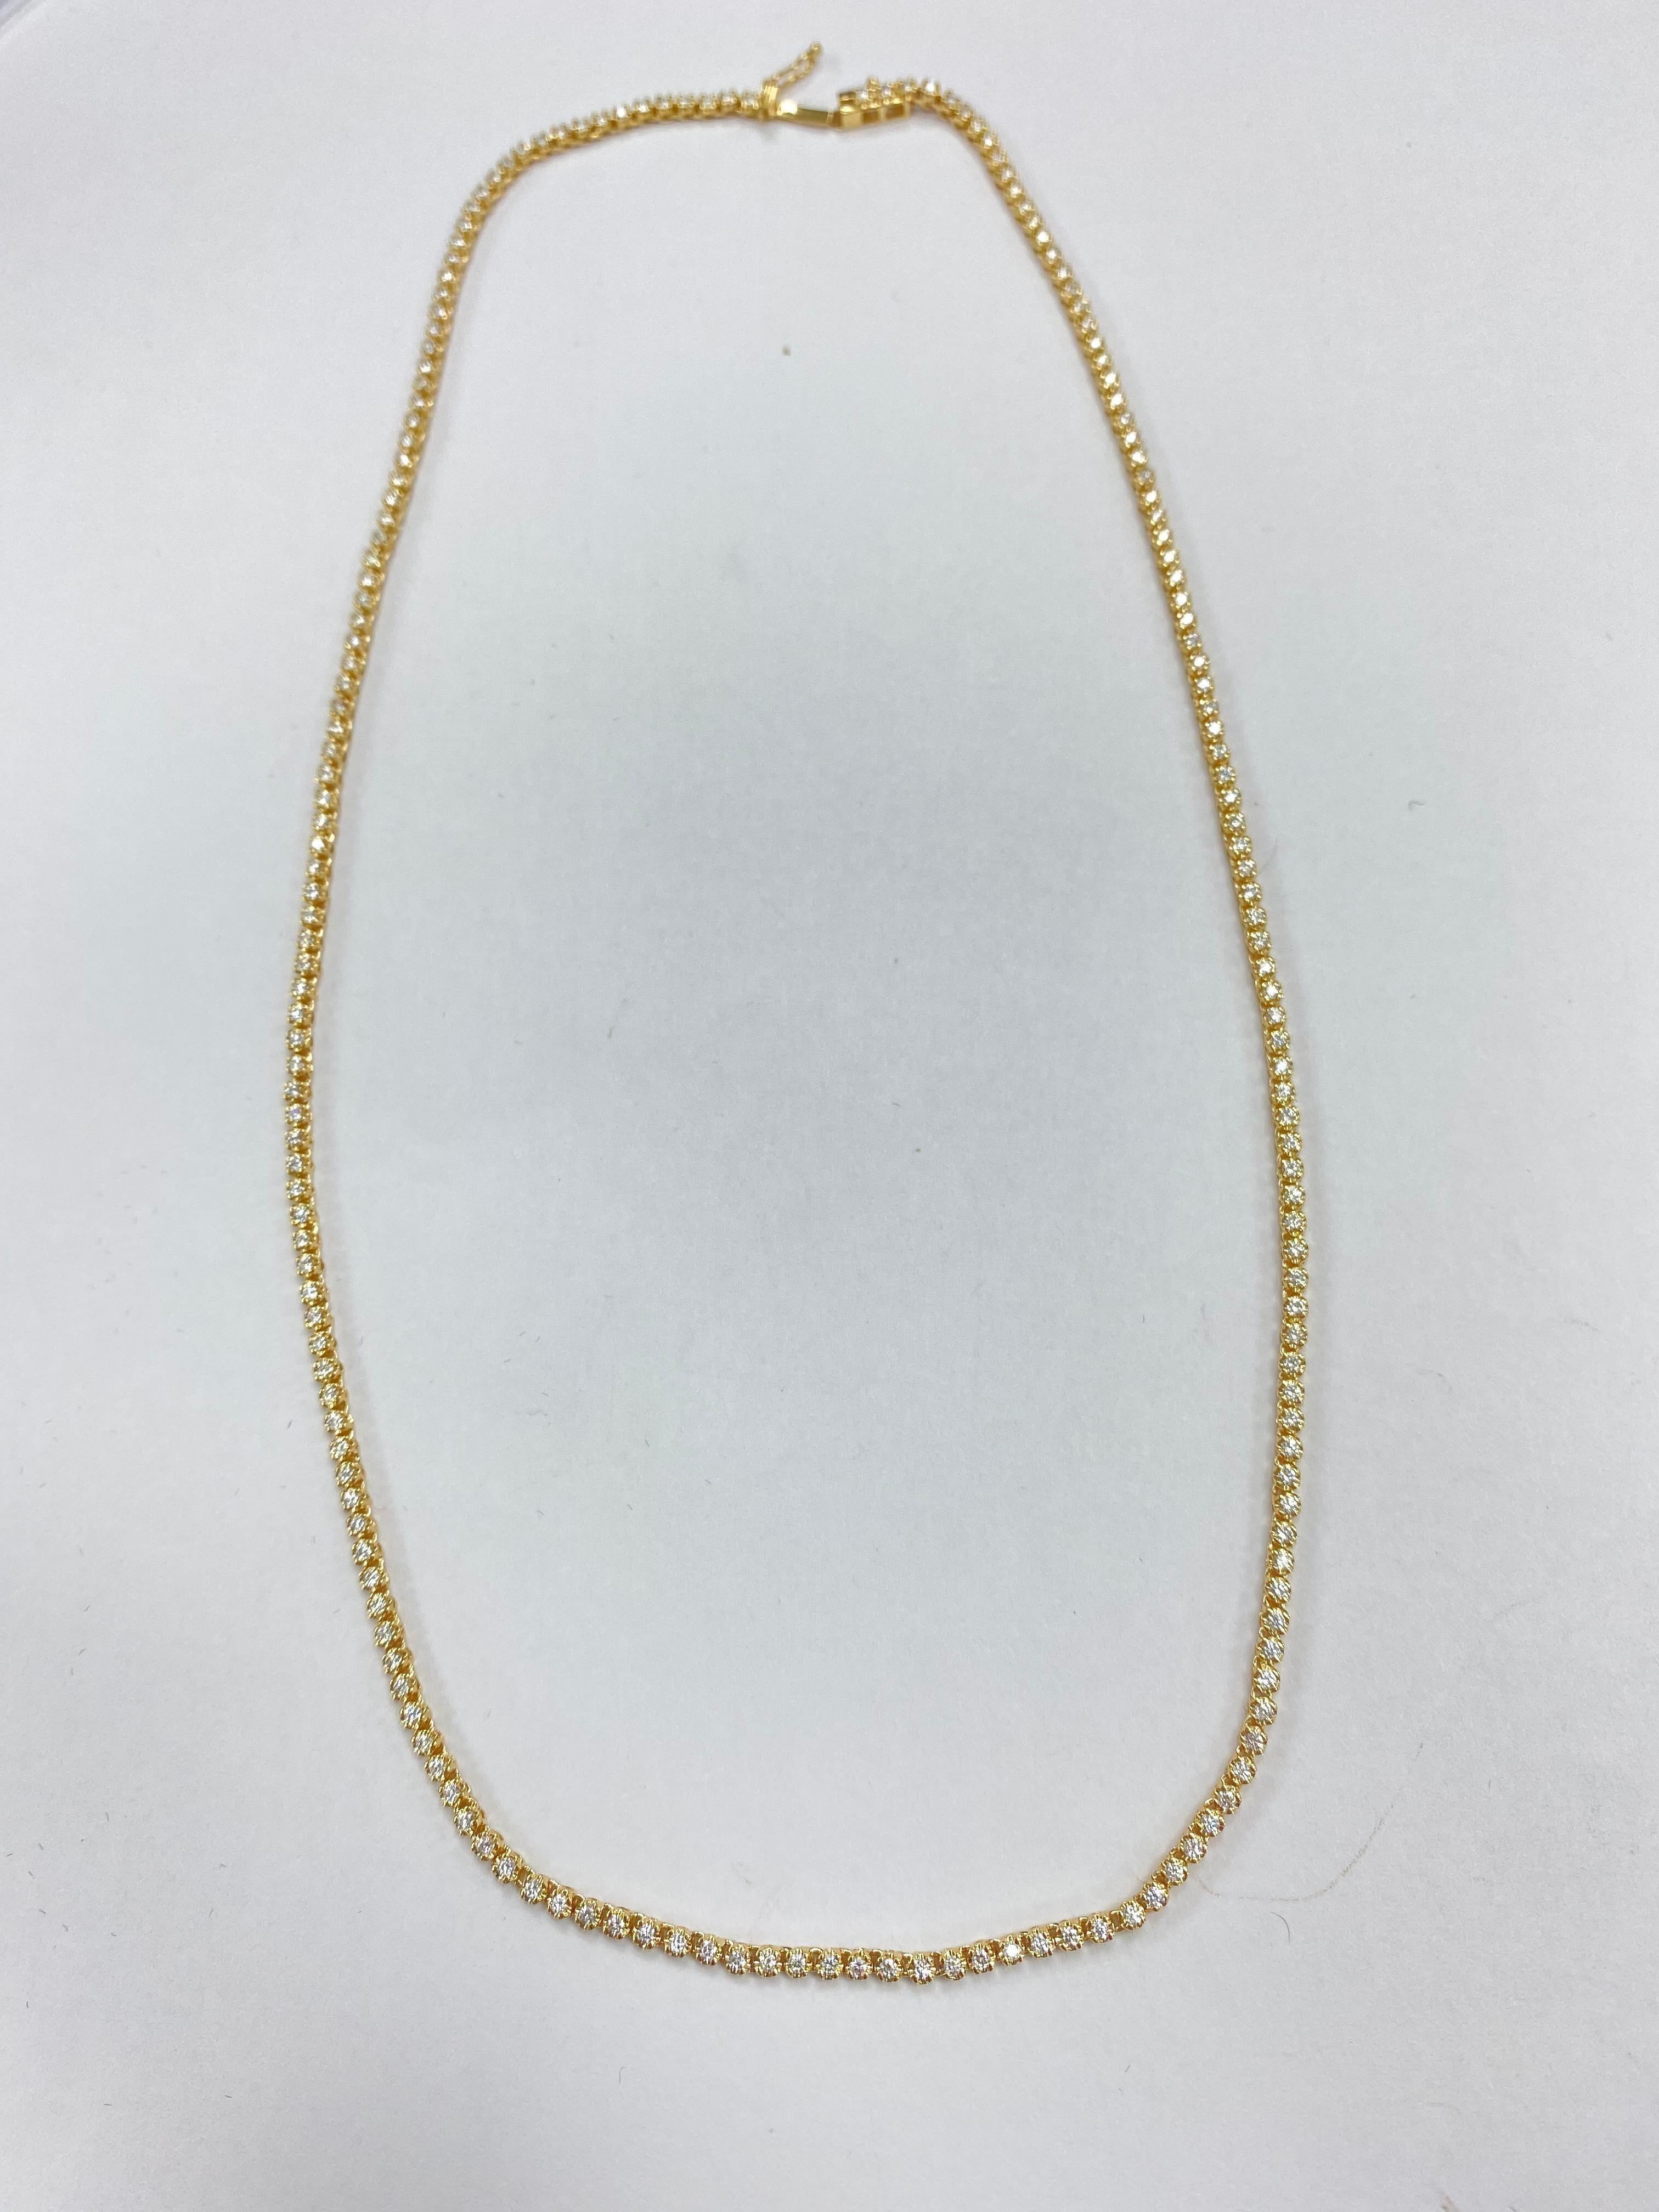 Diamonds 1.96 Carat Straight Line Diamond Tennis Necklace In New Condition For Sale In Great Neck, NY